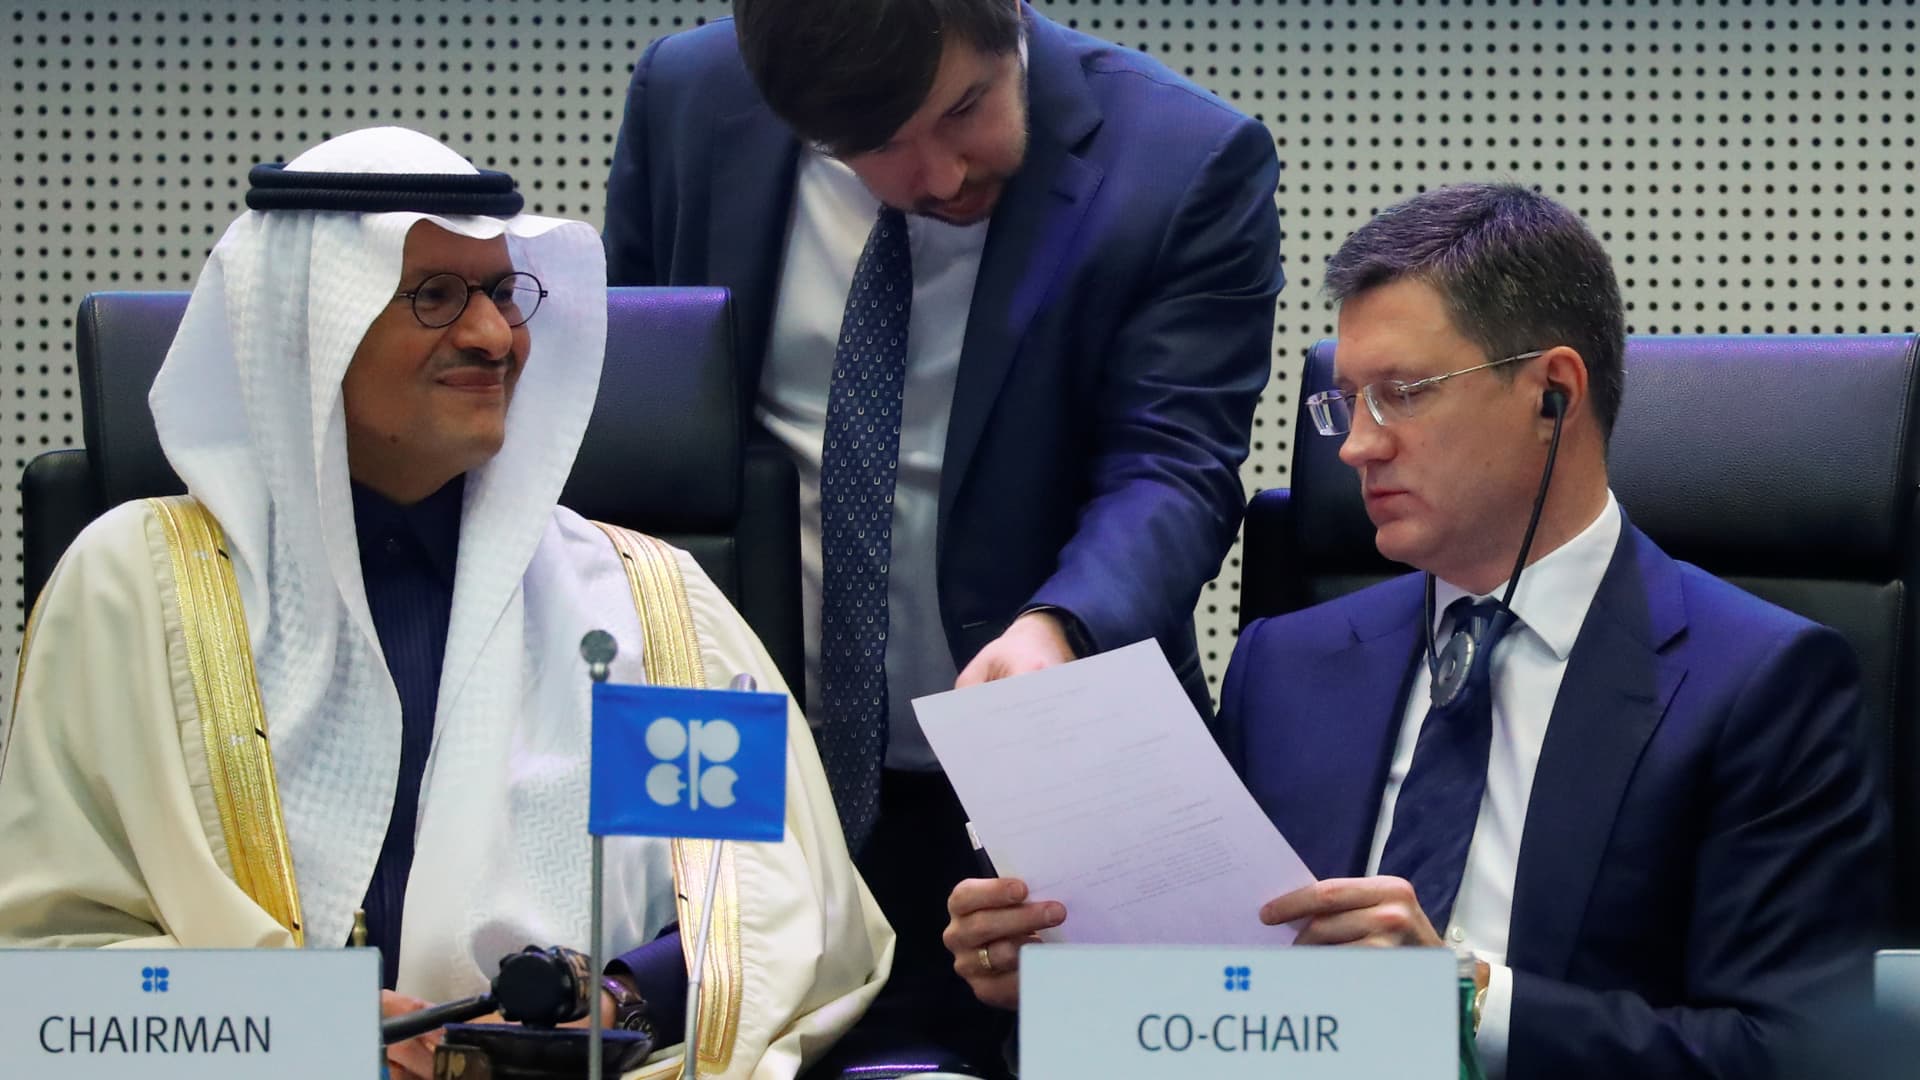 Saudi Arabia's Minister of Energy Prince Abdulaziz bin Salman Al-Saud and Russia's Energy Minister Alexander Novak are seen at the beginning of an OPEC and NON-OPEC meeting in Vienna, Austria December 6, 2019.